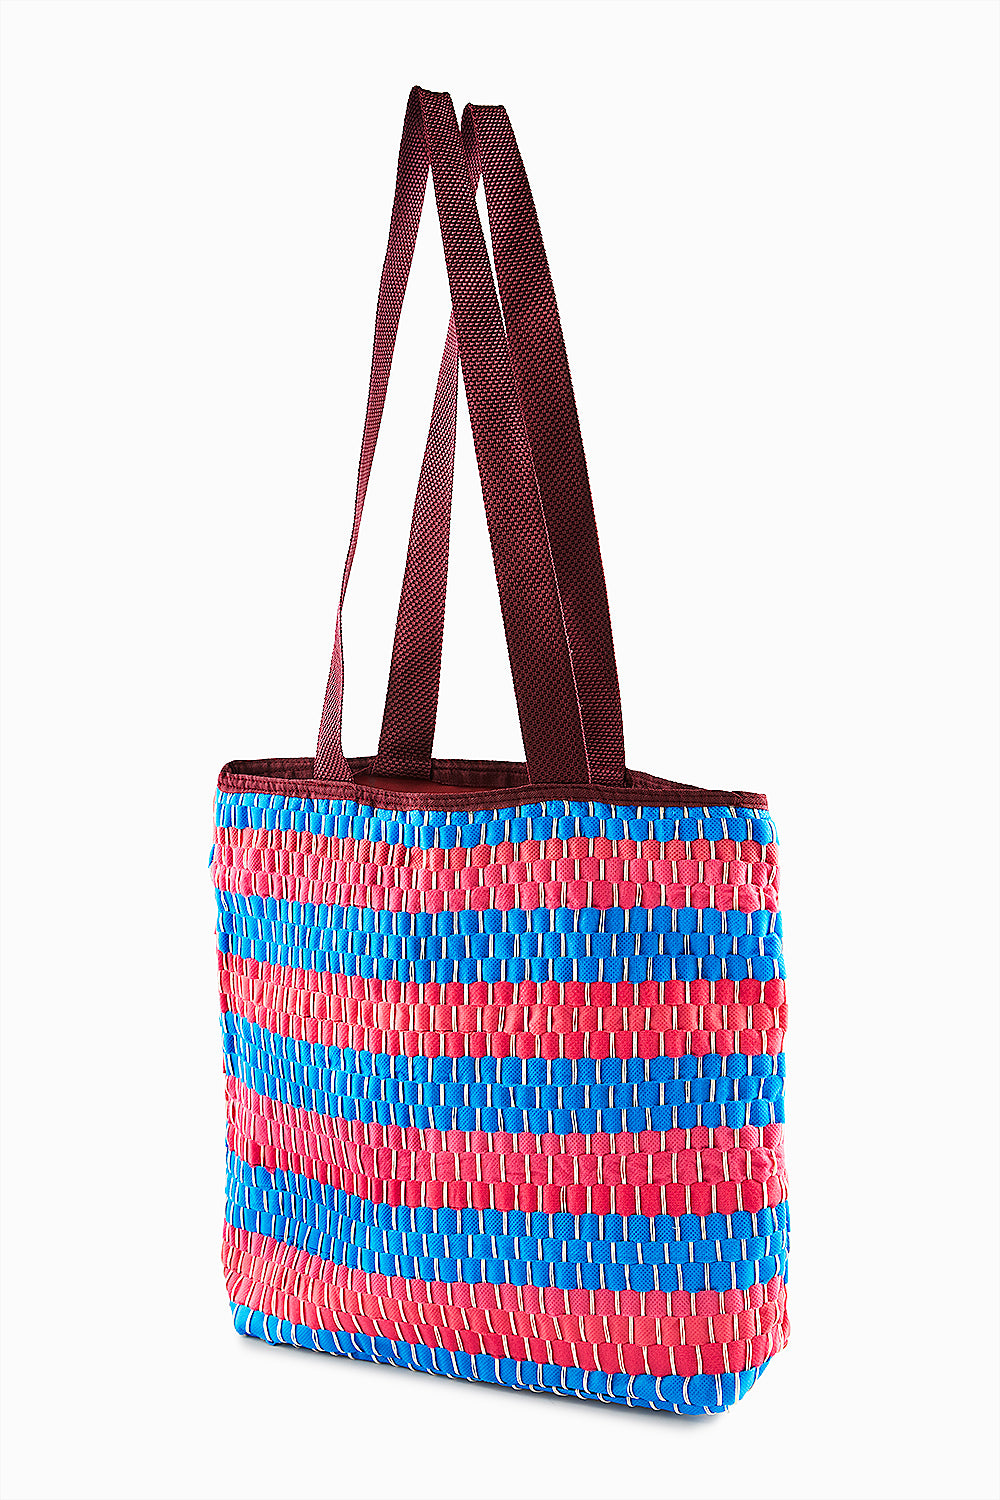 Sky Blue &  Colored Recycled Non-Woven Fabric Bag